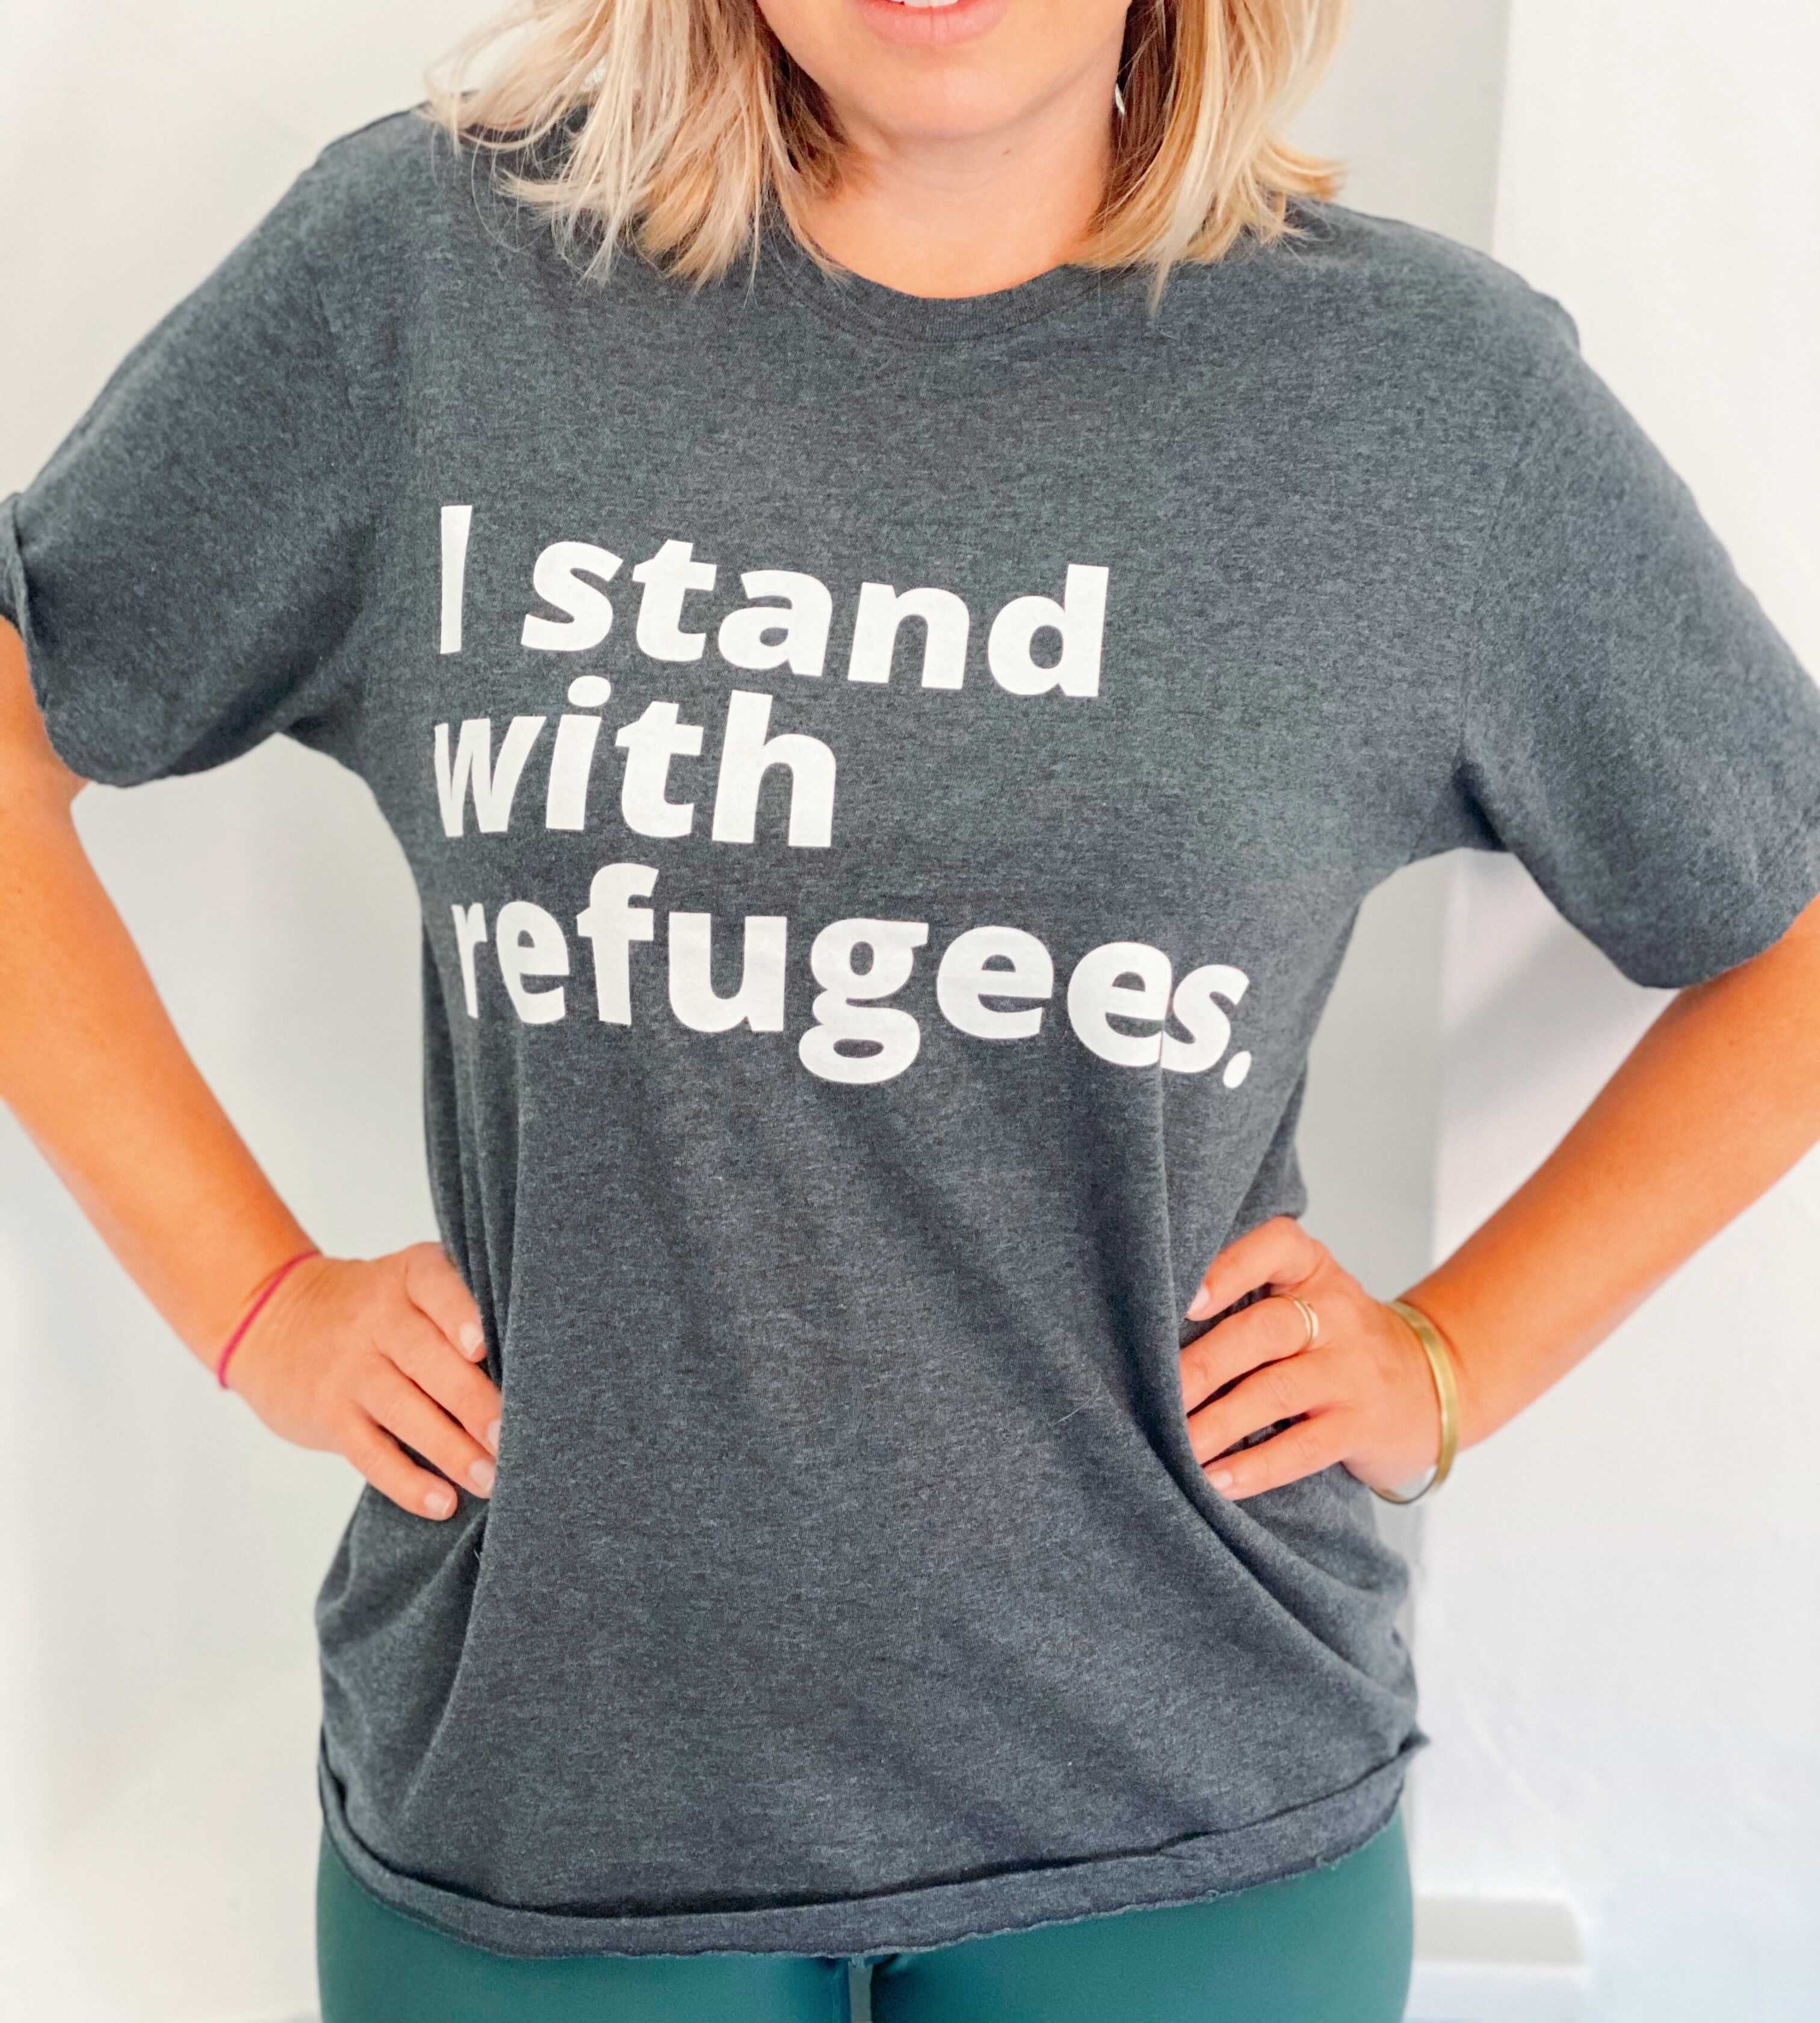 Gray tshirt with white wording "I stand with refugees."